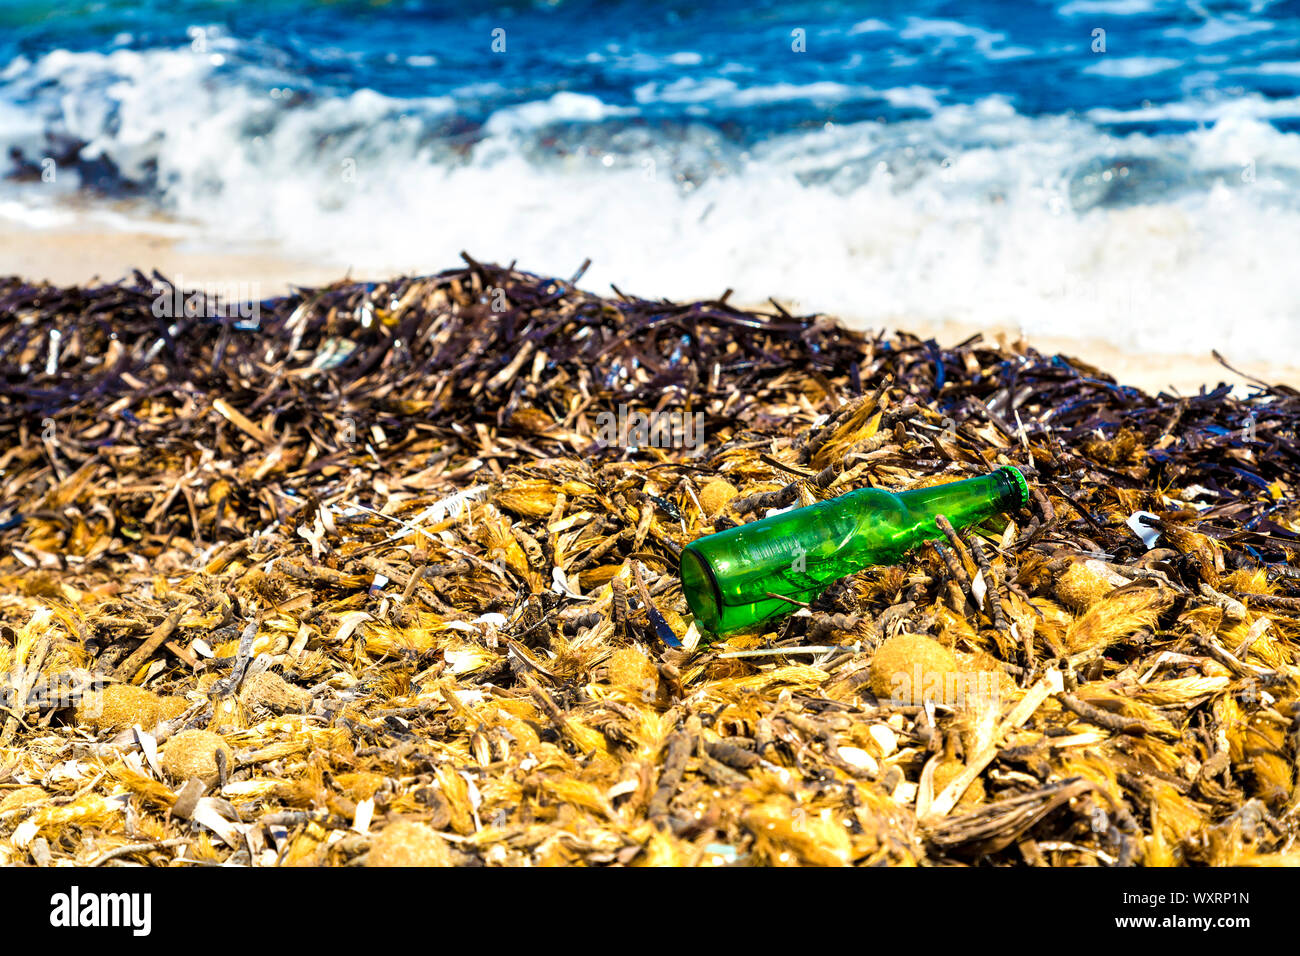 A glass bottle washed ashore on a beach, S'Espalmador, Balearic Islands, Spain Stock Photo